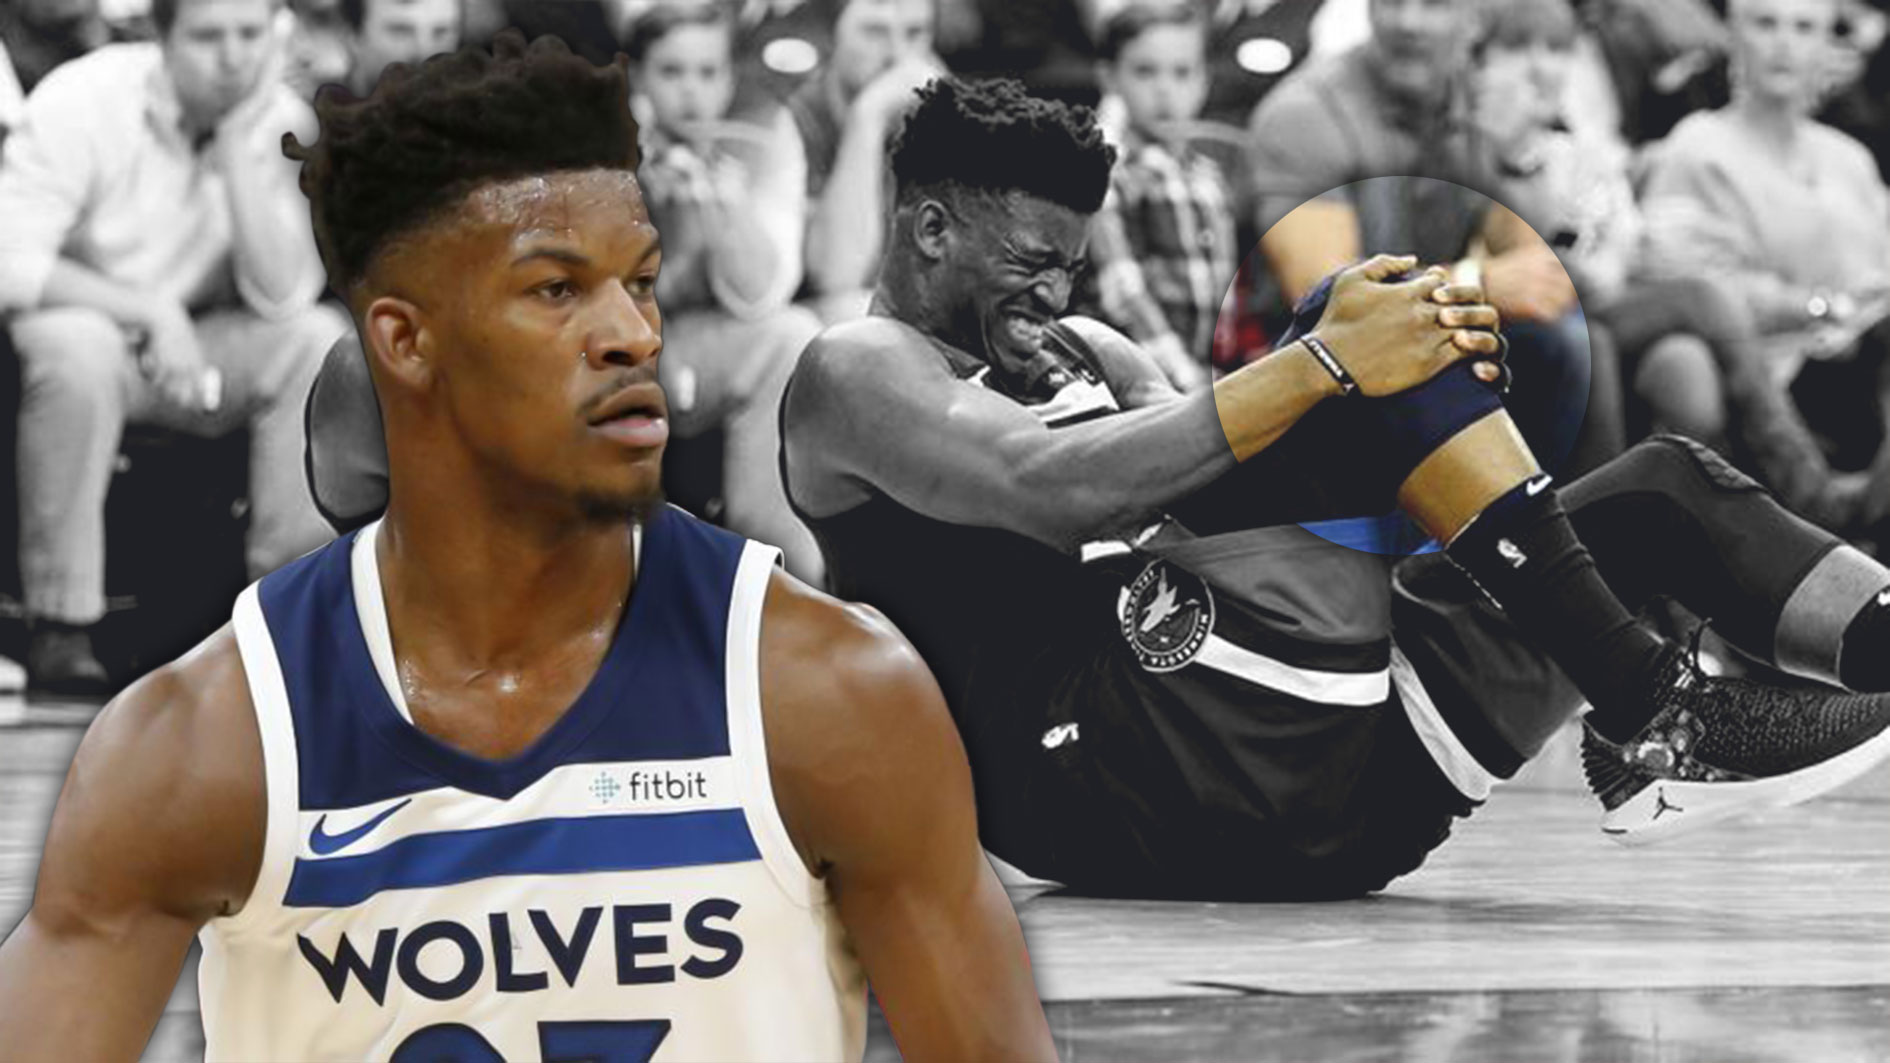 There_s-sense-of-optimism-Jimmy-Butler-avoided-torn-ACL